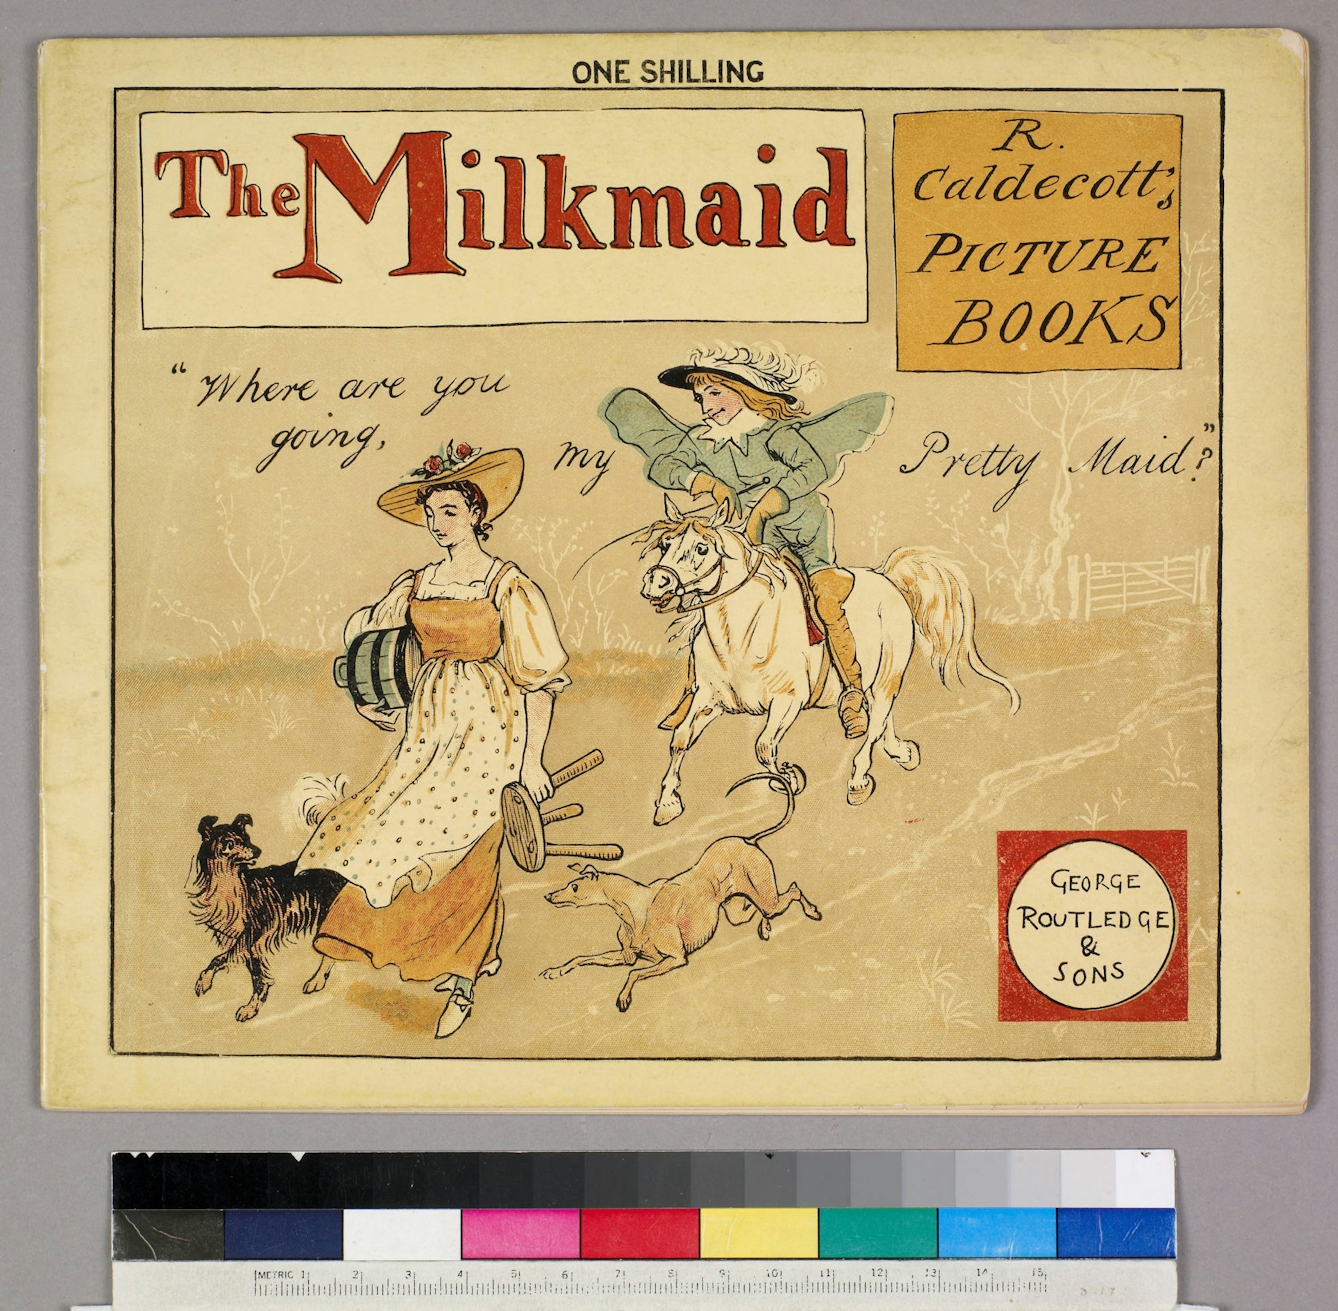 A book front cover showing a milkmaid, in a long dress with an apron, carrying a milking stool and a bucket. She is being followed by two dogs and pursued by a man riding a horse and calling " Where are you going, my pretty maid?"